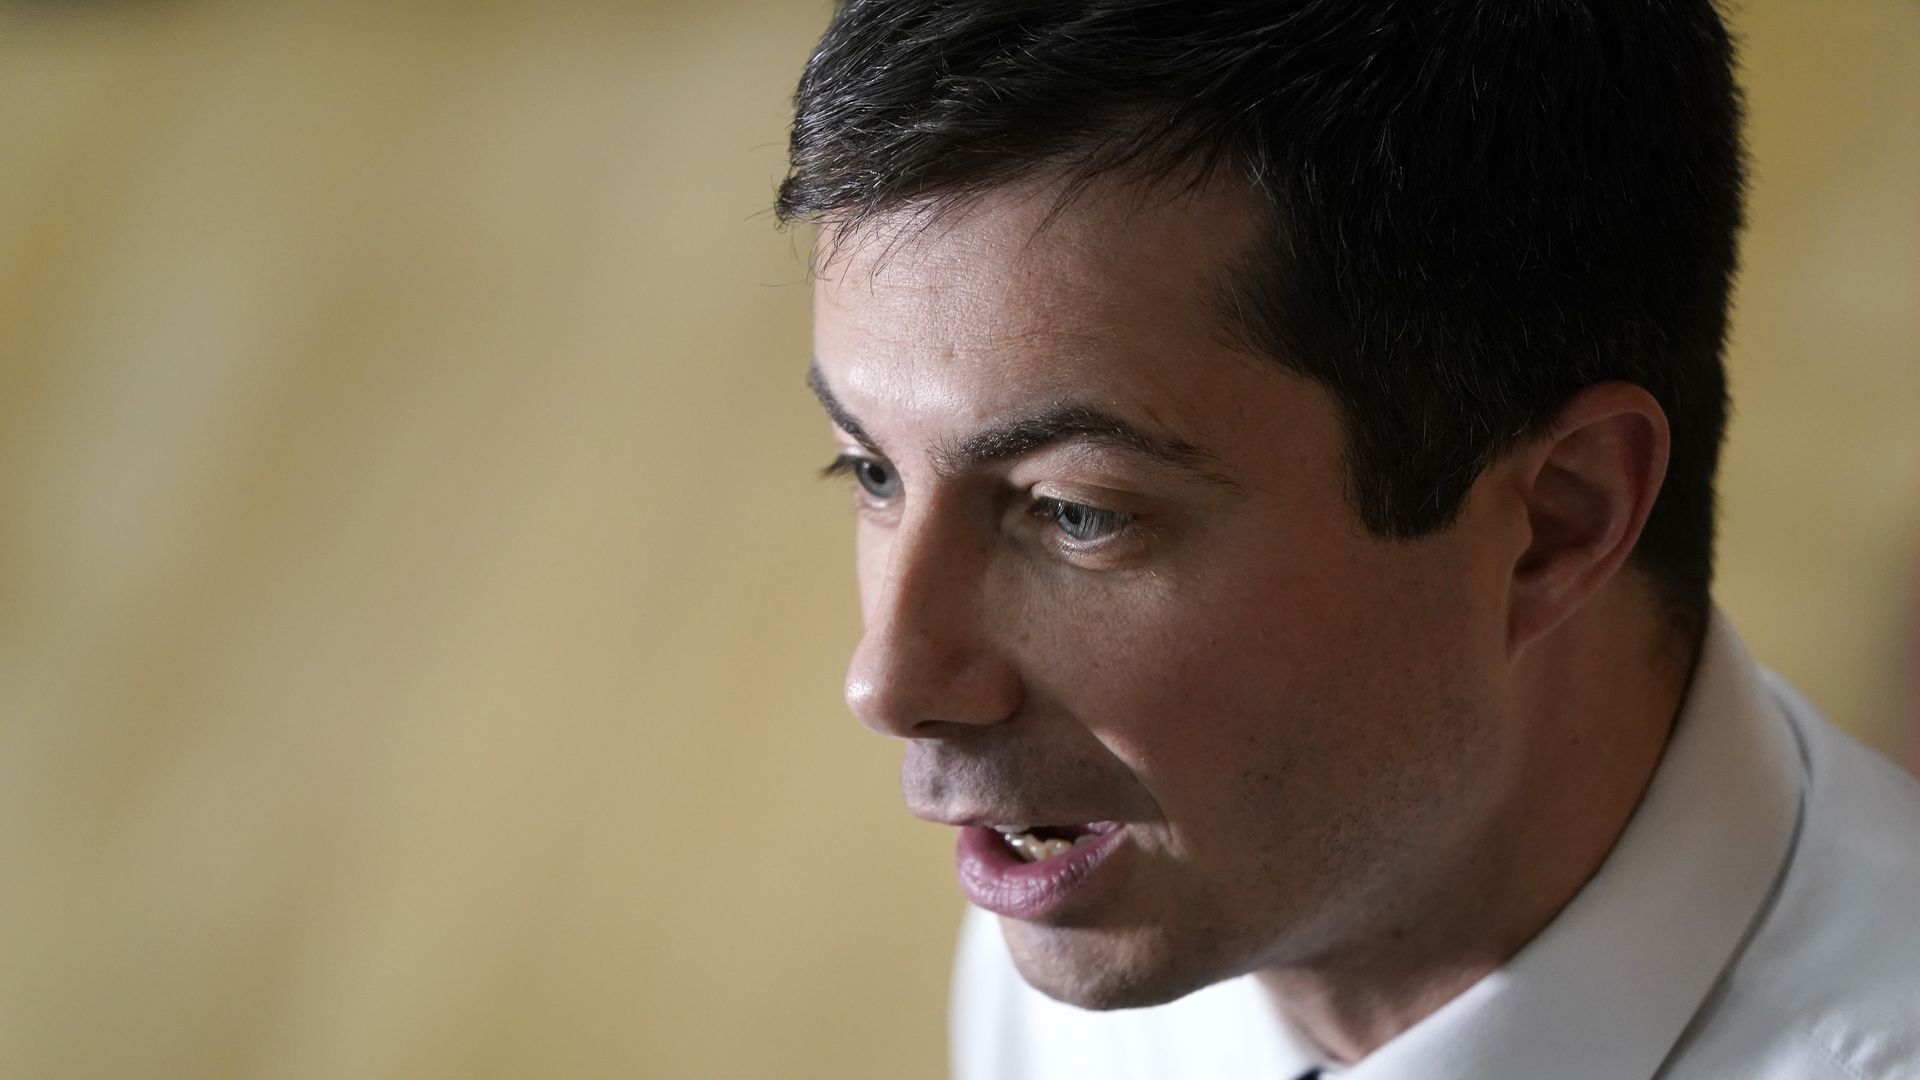 In this image, Pete Buttigieg talks while wearing a shirt and tie.